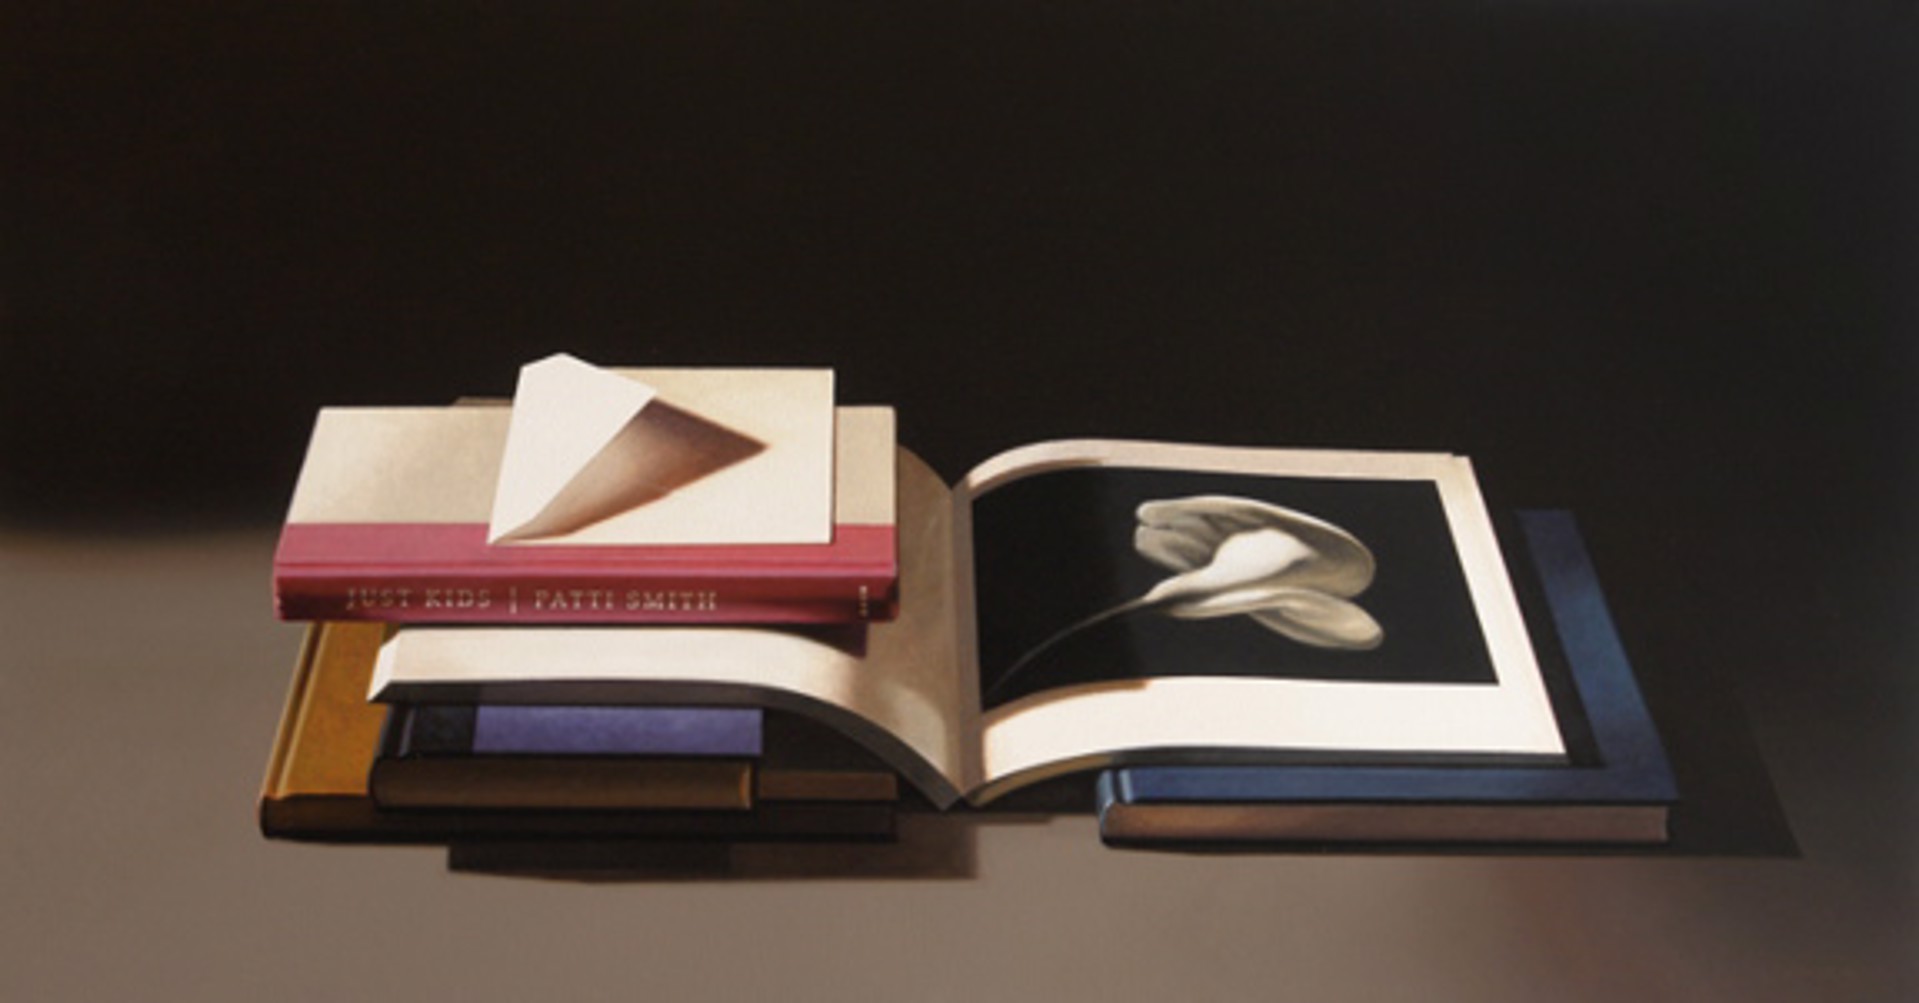 Still Life with Mapplethorpe and Smith by Guy Diehl